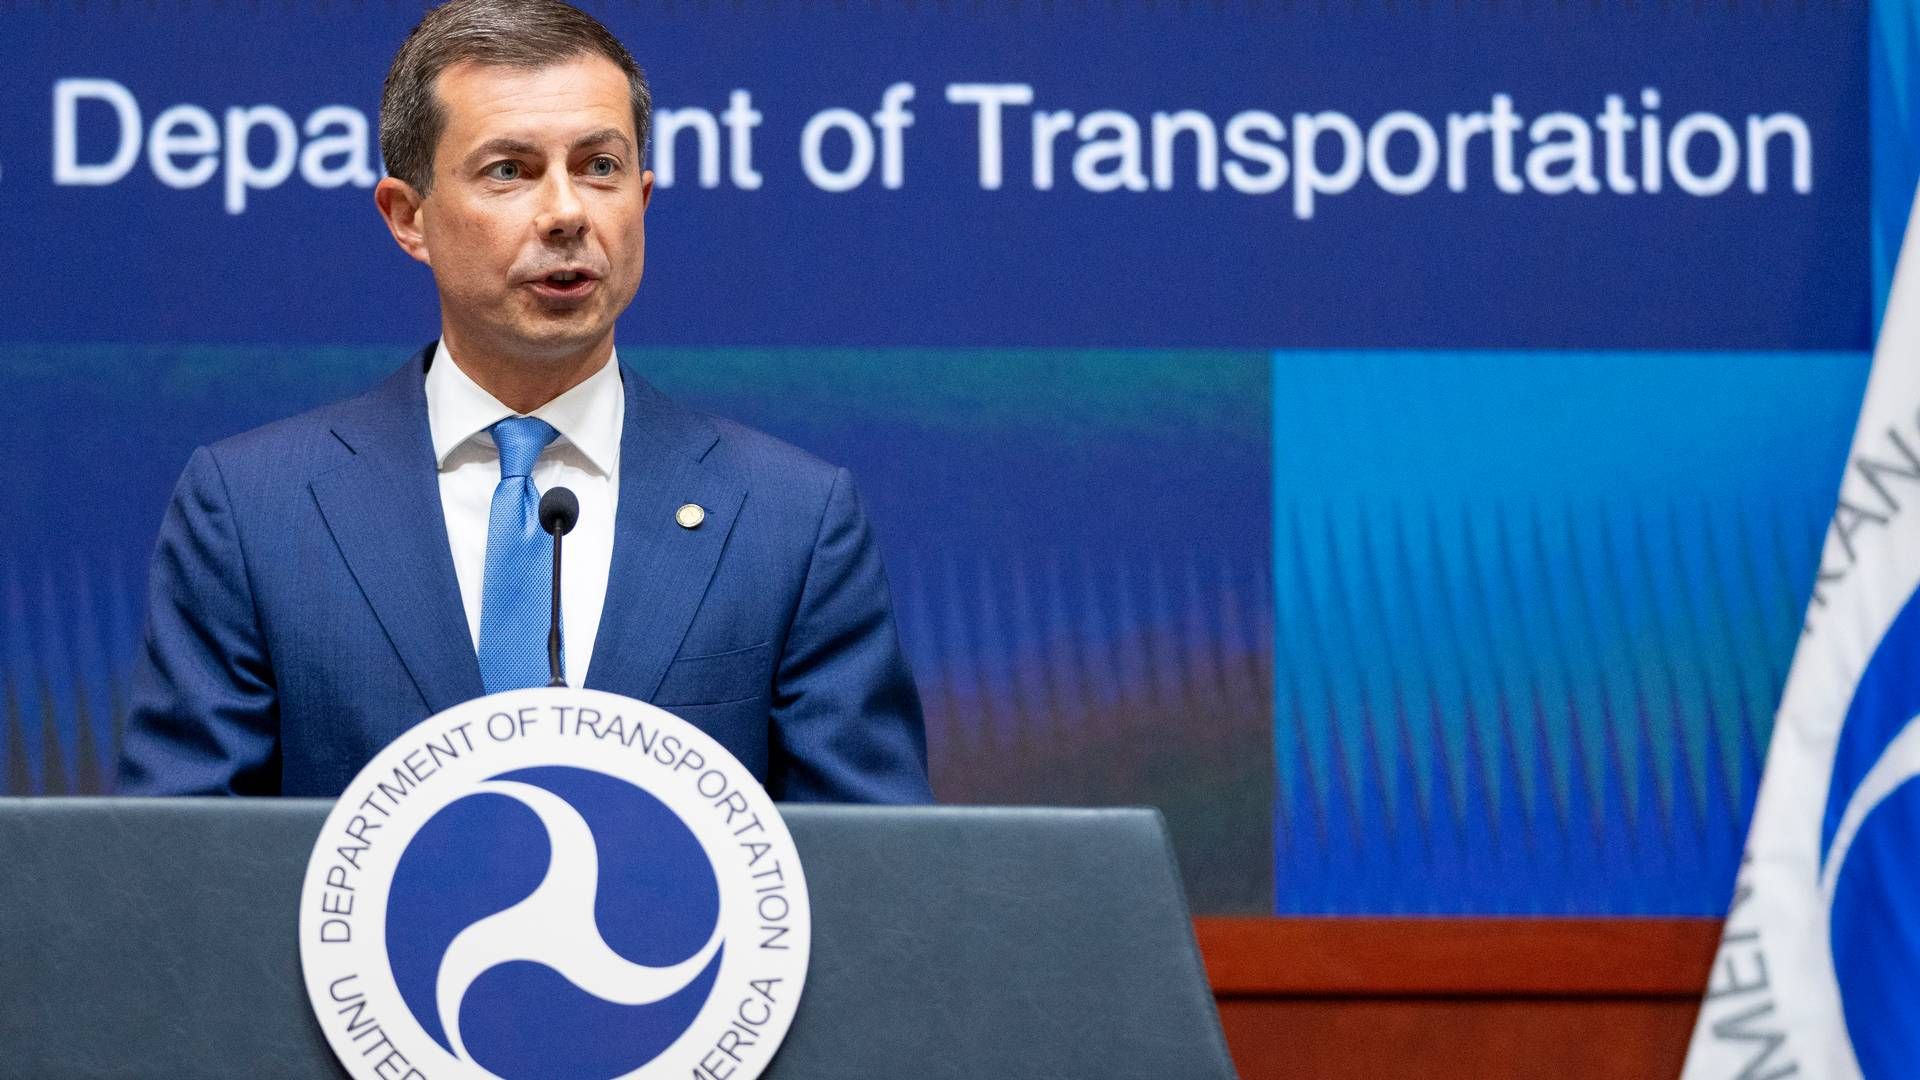 “These investments will help expand capacity and speed up the movement of goods through our ports, contributing to cleaner air and more good-paying jobs as we go,” says Buttigieg about the new investment in US ports. | Photo: Alex Brandon/AP/Ritzau Scanpix